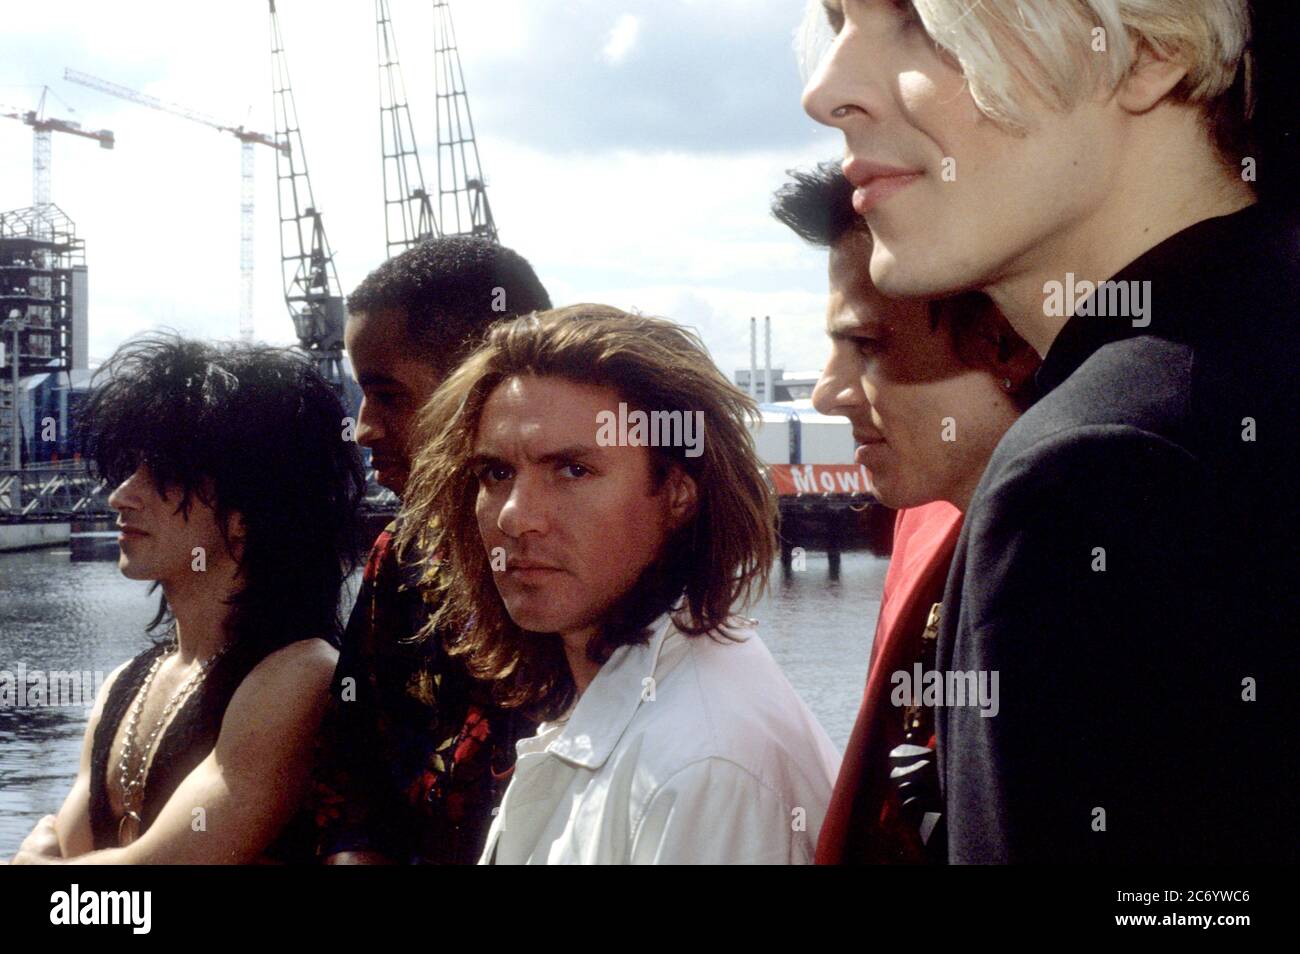 Warren Cuccurullo, Sterling Campbell, Simon Le Bon, John Taylor and Nick Rhodes of Duran Duran at the photocall for the Big Electric Theater tour in Limeharbour on the Isle of Dogs. London, April 13, 1989 | usage worldwide Stock Photo